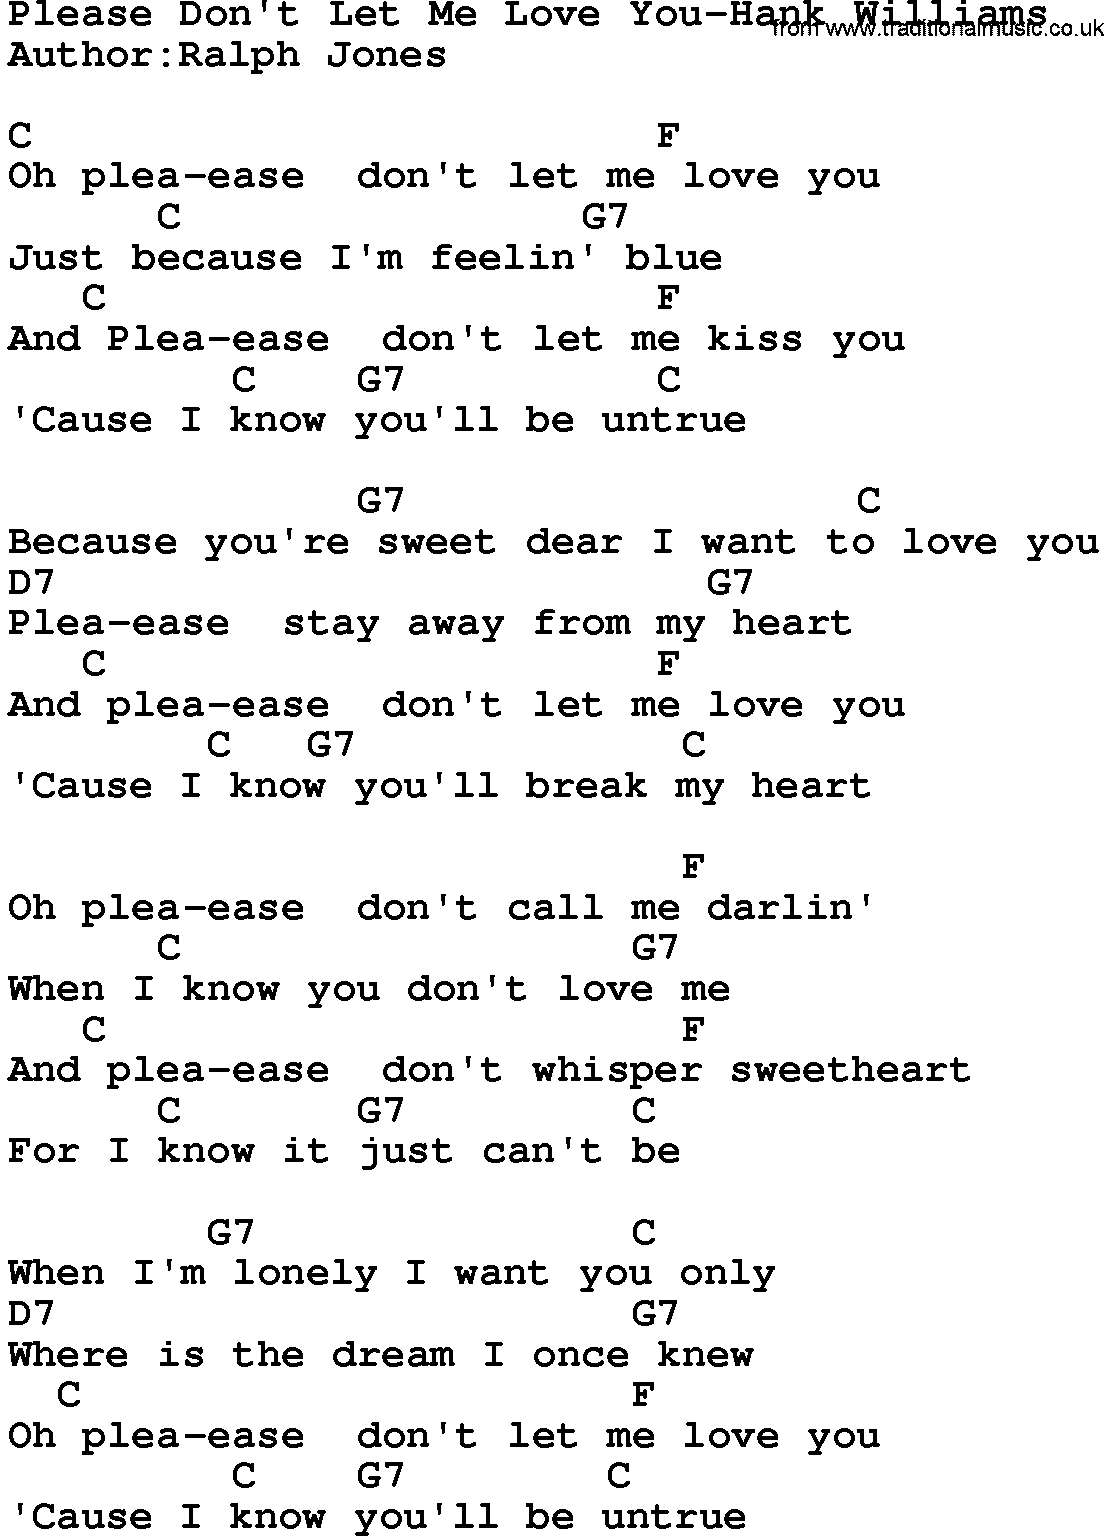 Country music song: Please Don't Let Me Love You-Hank Williams lyrics and chords